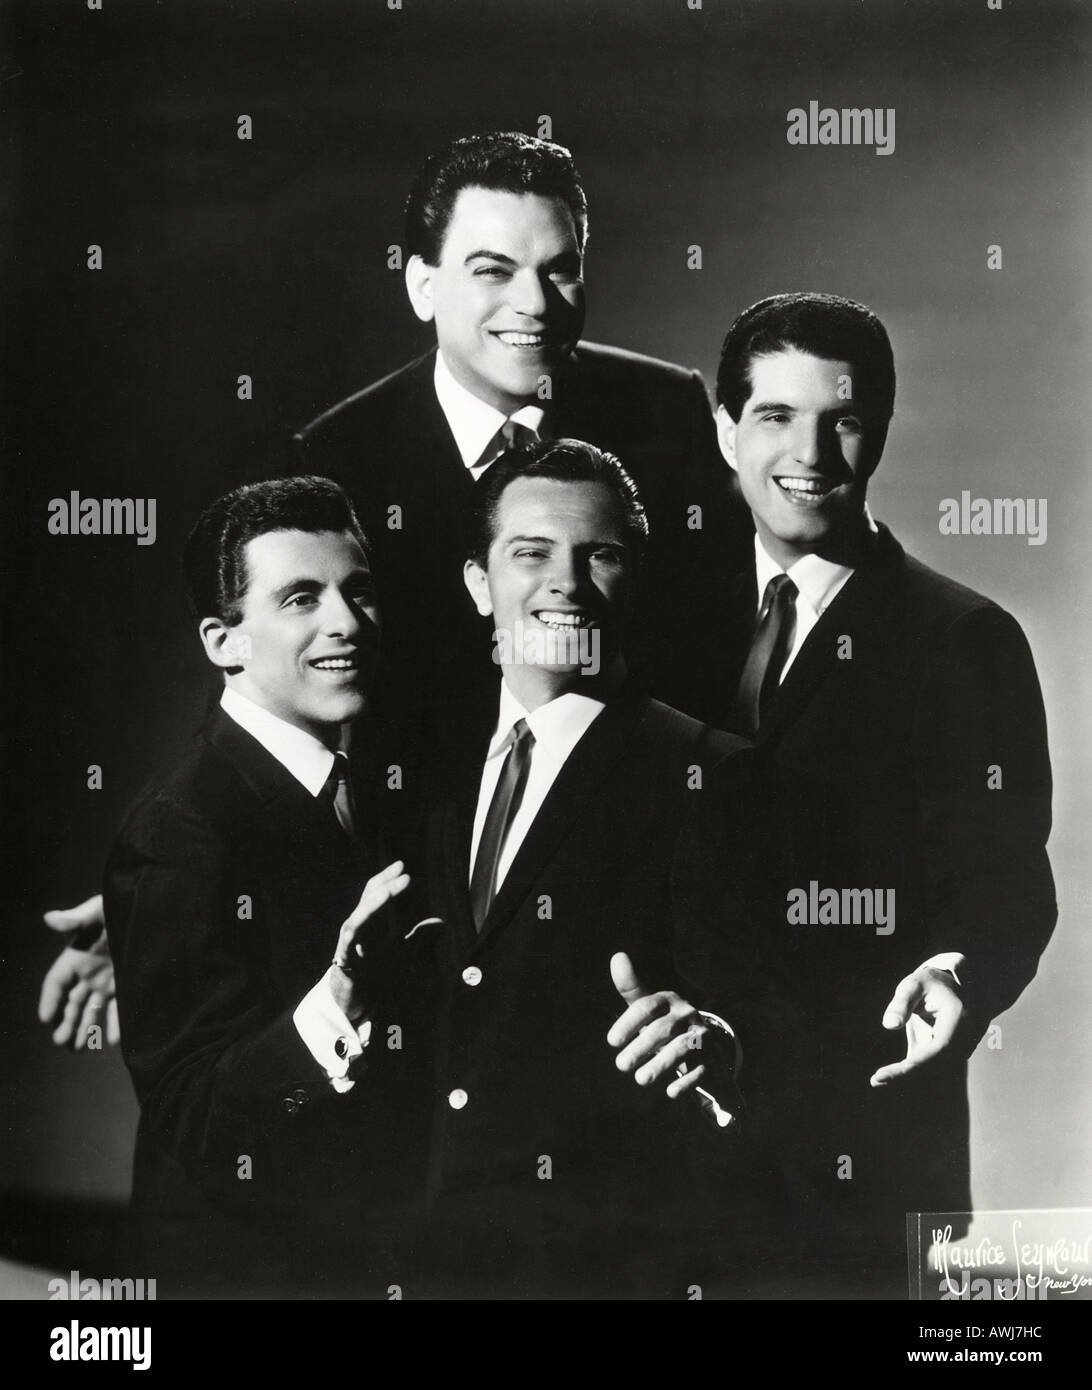 FOUR SEASONS Promotional photo of US vocal group about 1966 with Frankie Valli at left Stock Photo